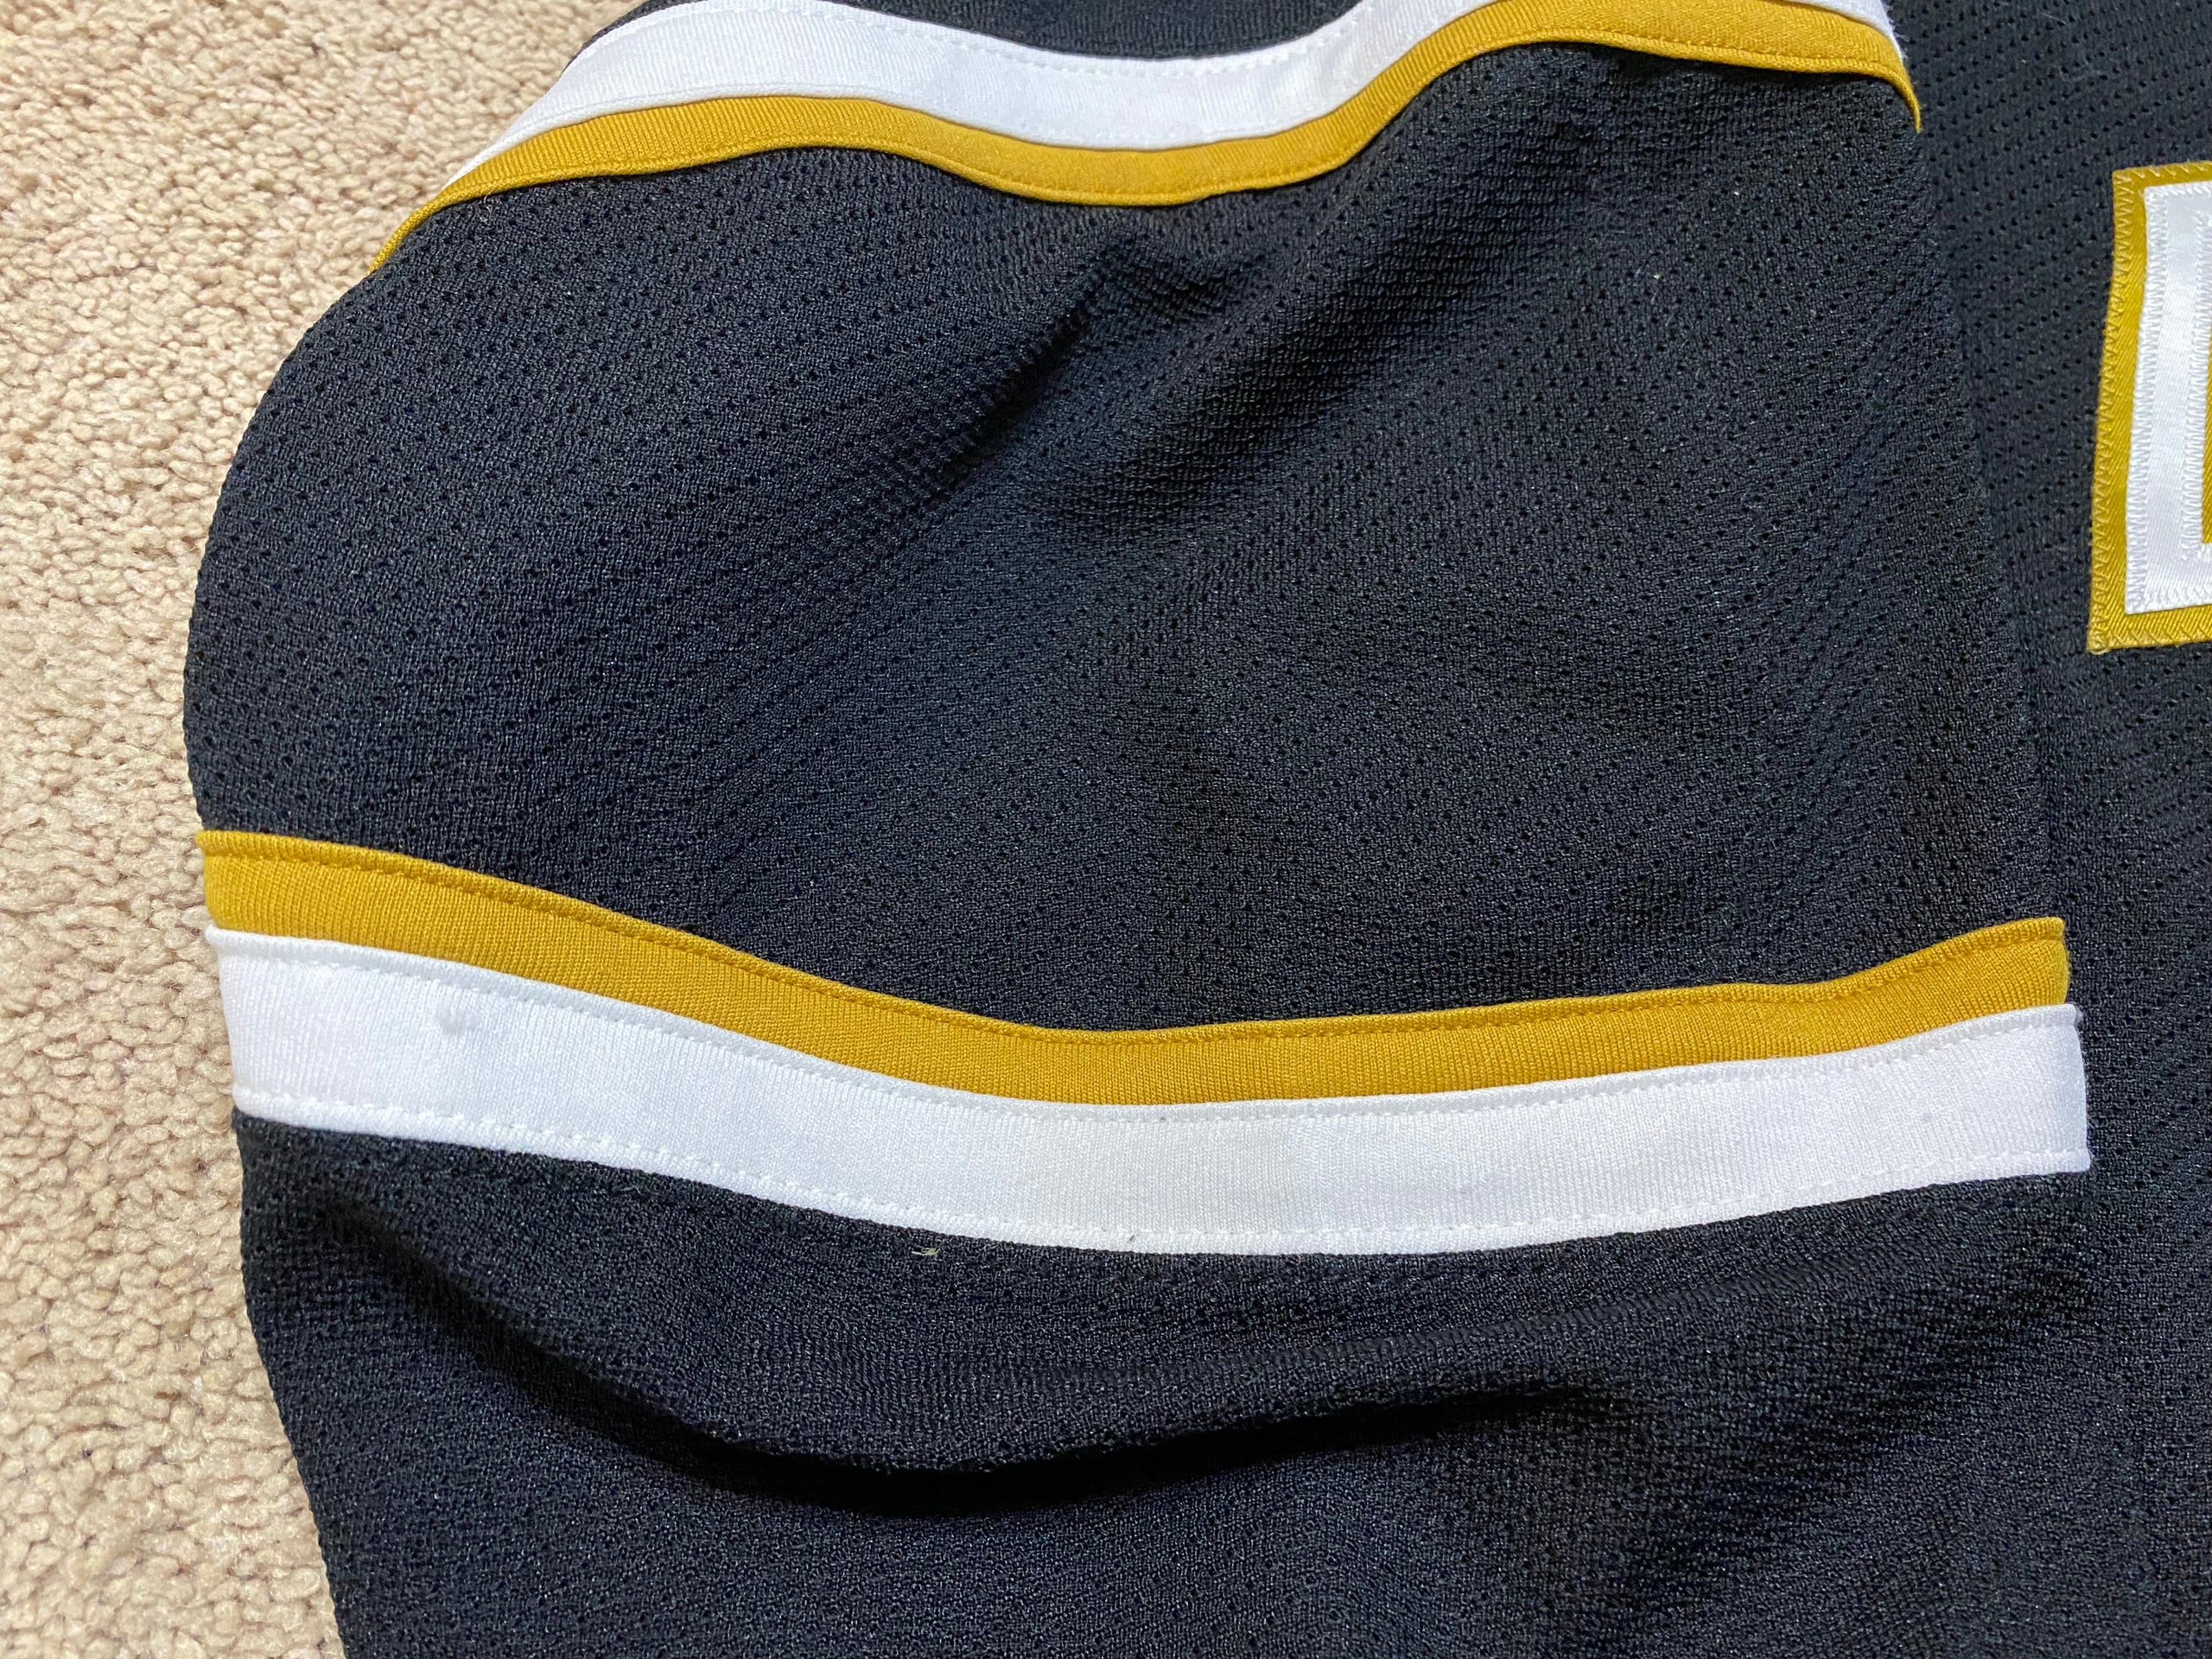 Dallas Stars on X: RT @StarsHangar: Happy Monday!! The Game Worn Blackout  Jersey Auction is this week! Starts 5/25 at 12p Ends 5/28 at 8p All Times  Central… / X